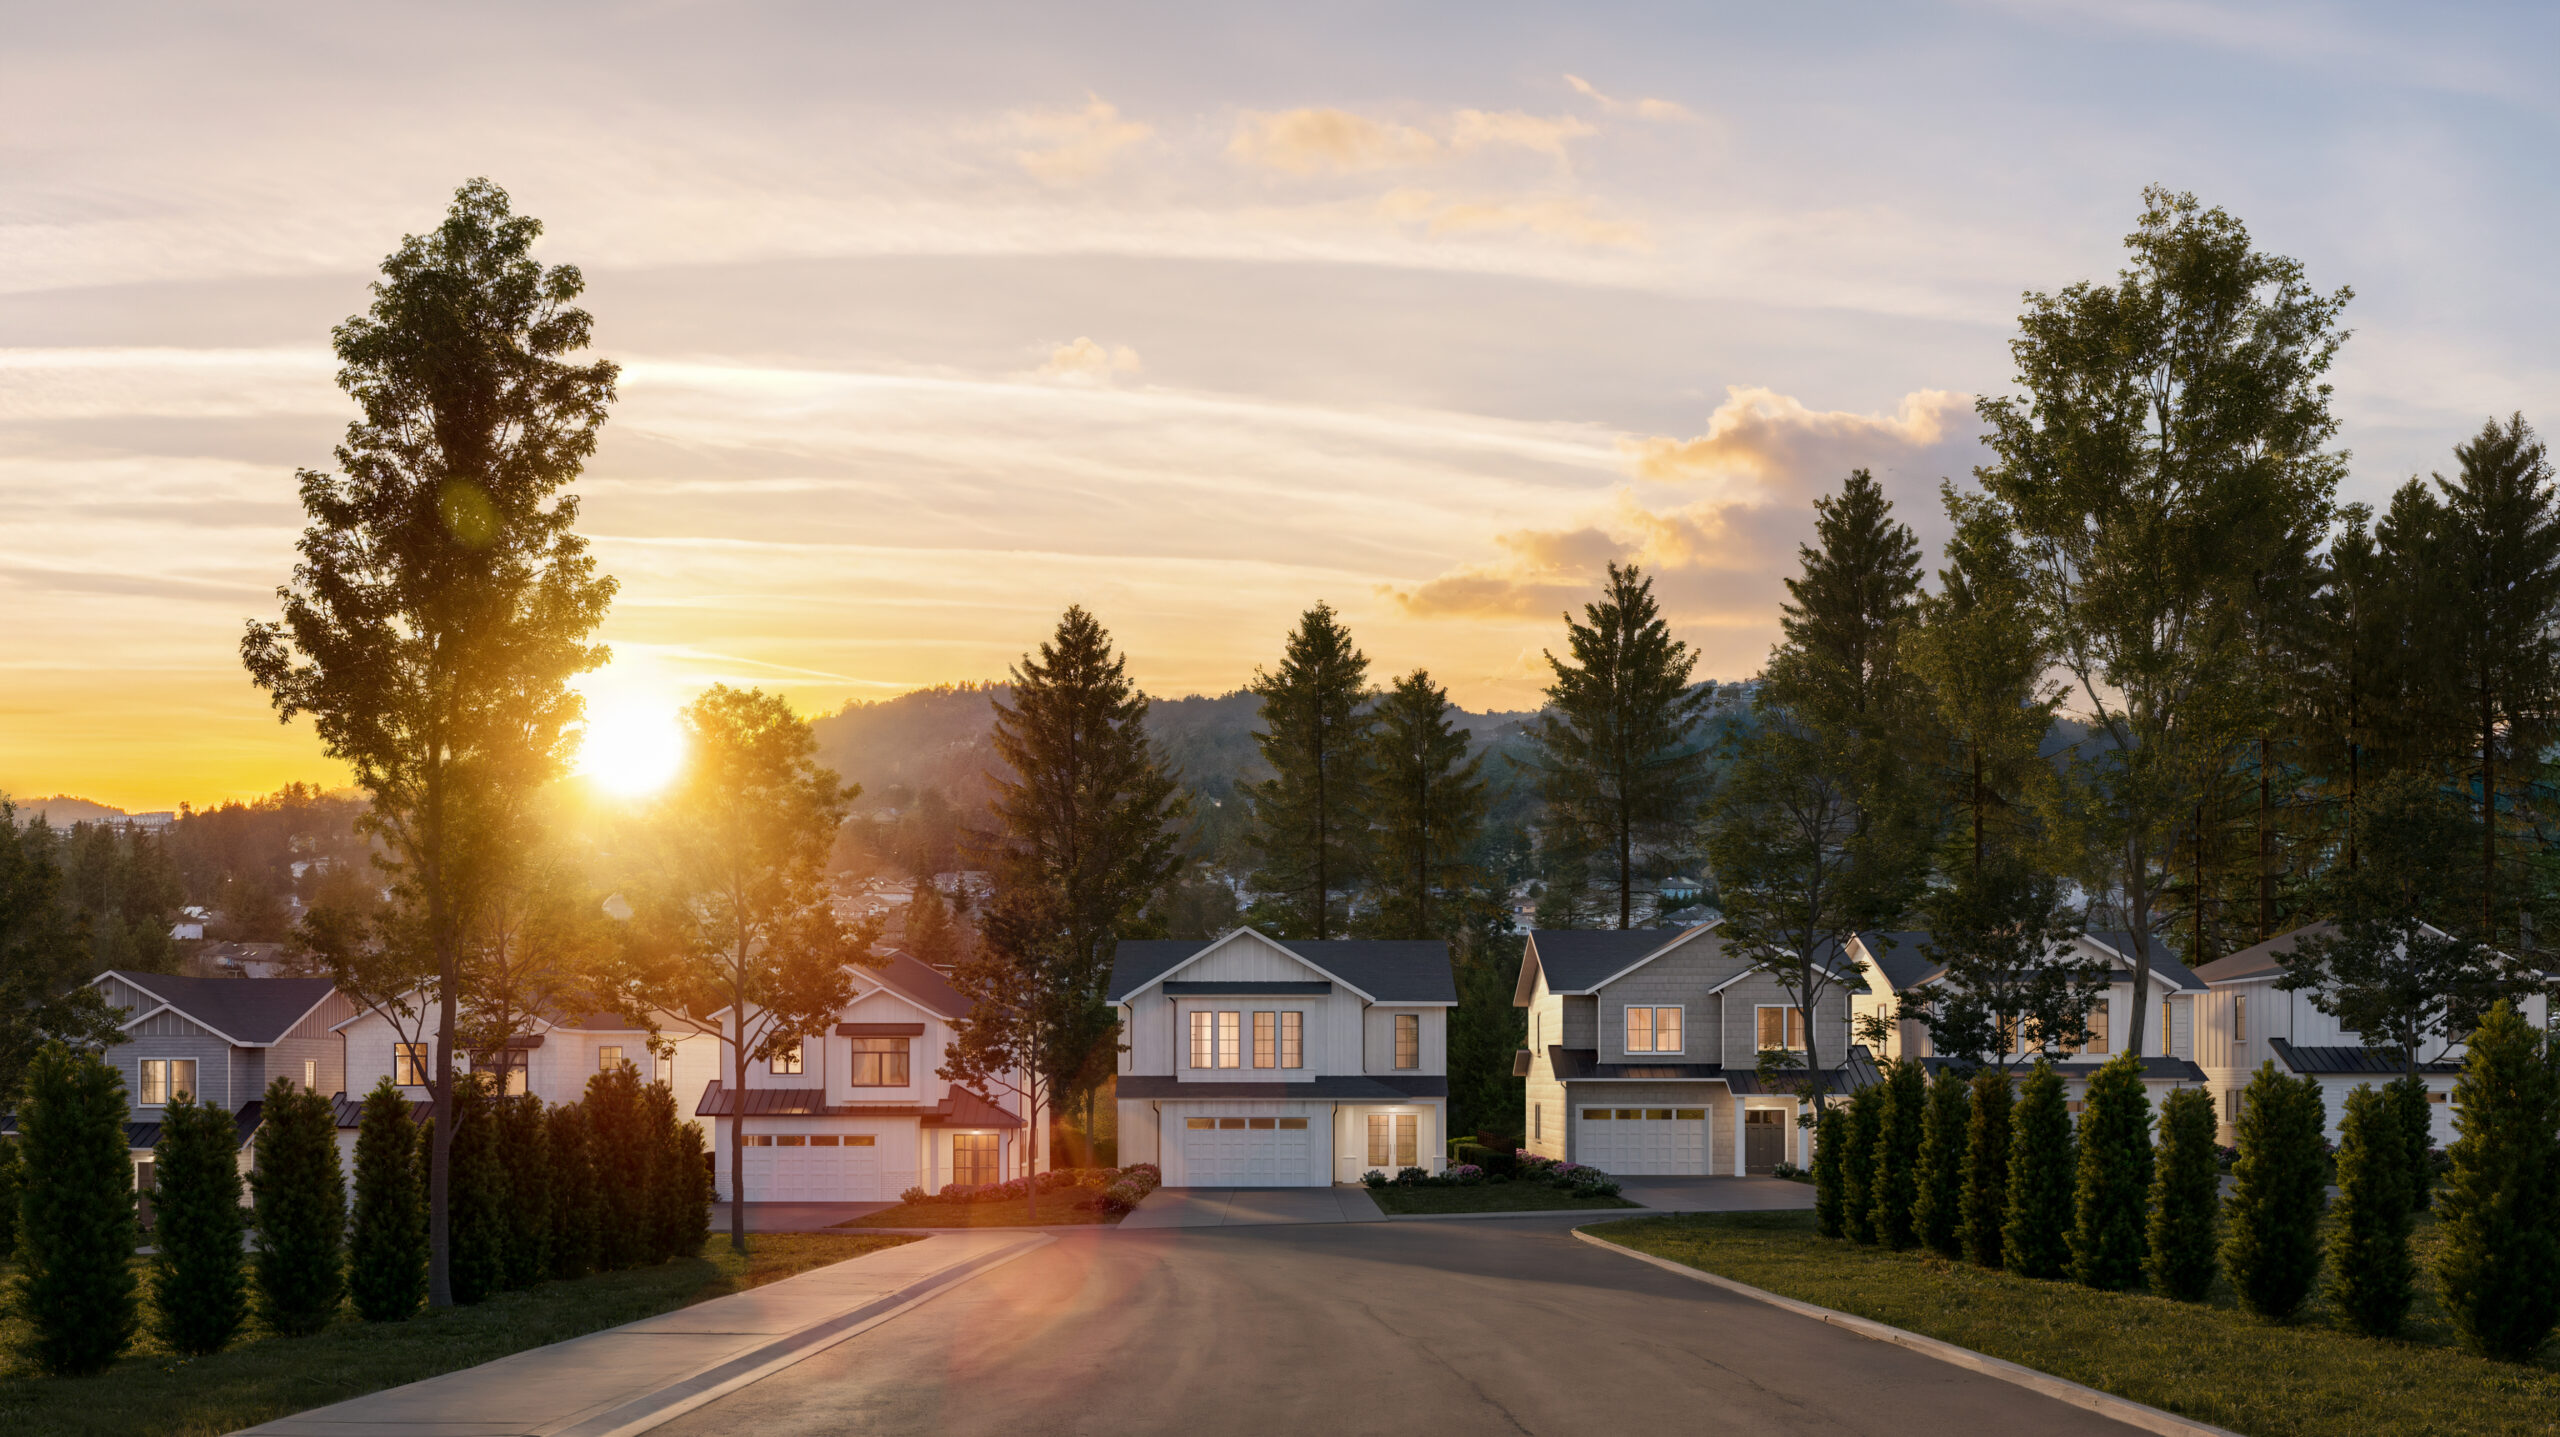 Madrona Ridge Single Family Building Lots in Langford, BC